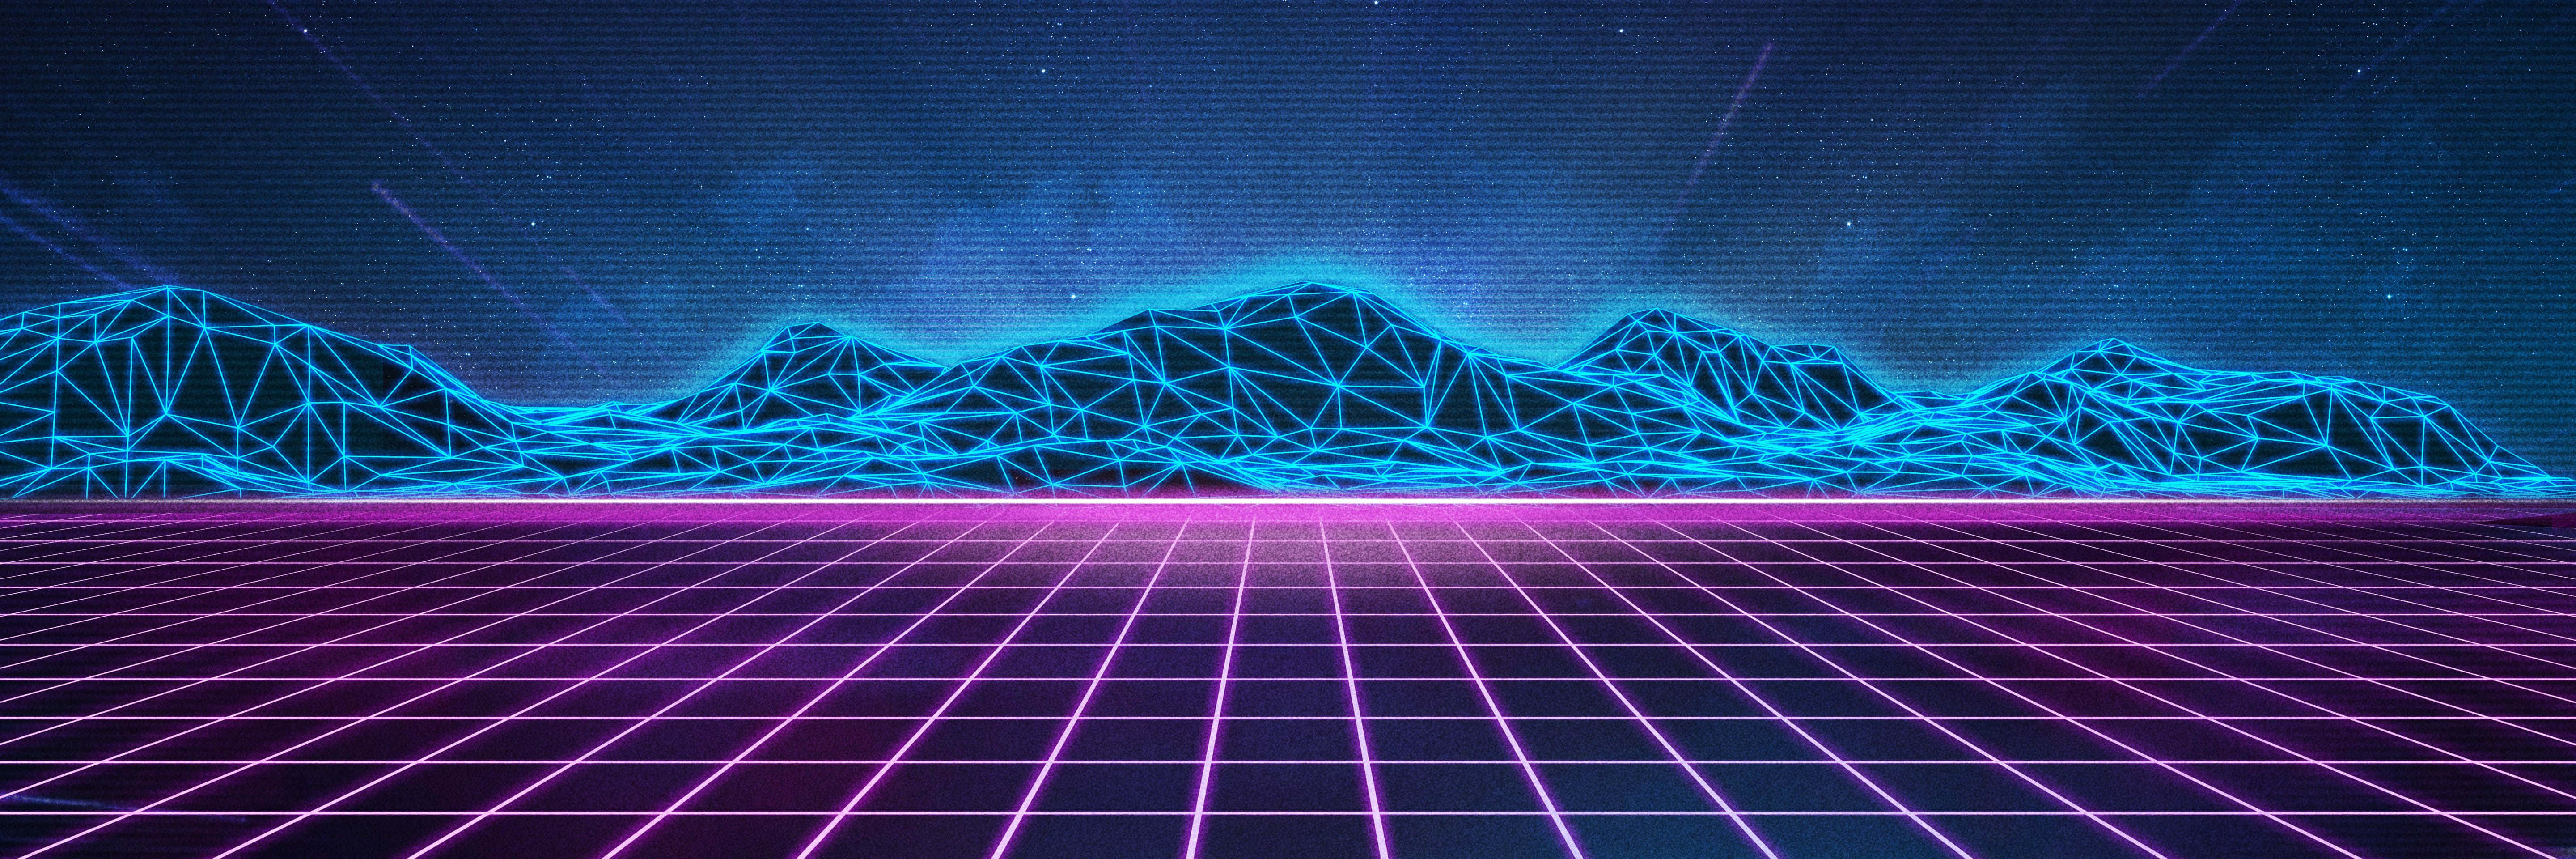 A Neon Background With Mountains And A Grid Wallpaper